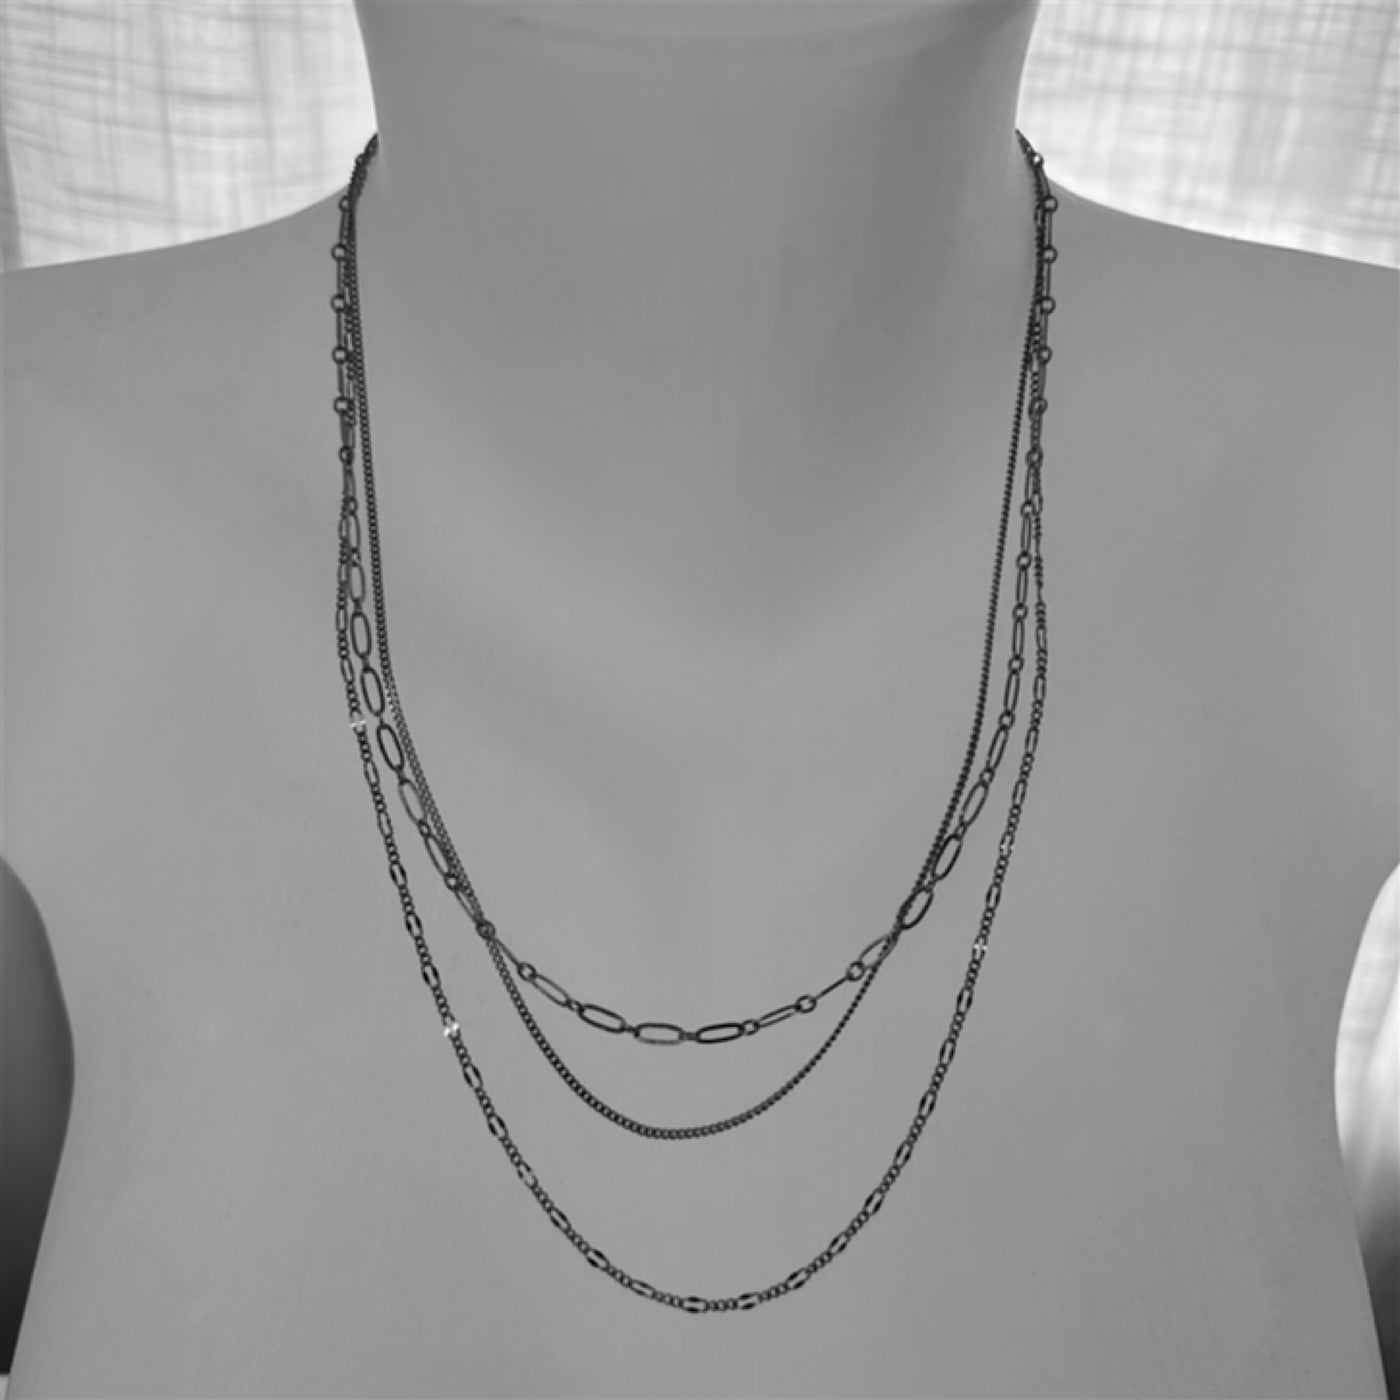 Nanaimo" Triple Layer Textured Chain Necklace - Silver